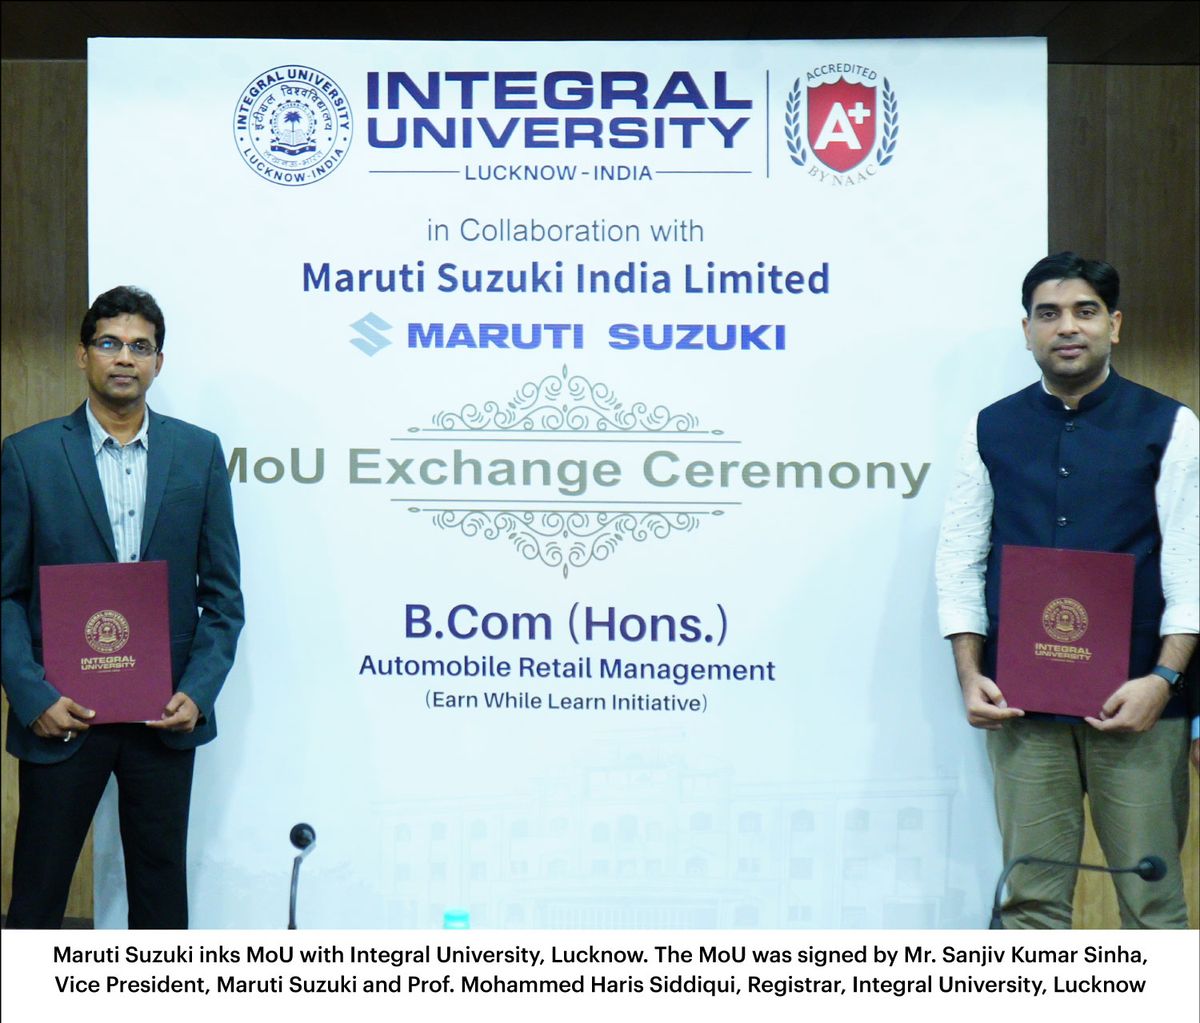 Maruti Suzuki joins hands with Integral University, Lucknow to jointly offer B. Com in Automobile Retail Management